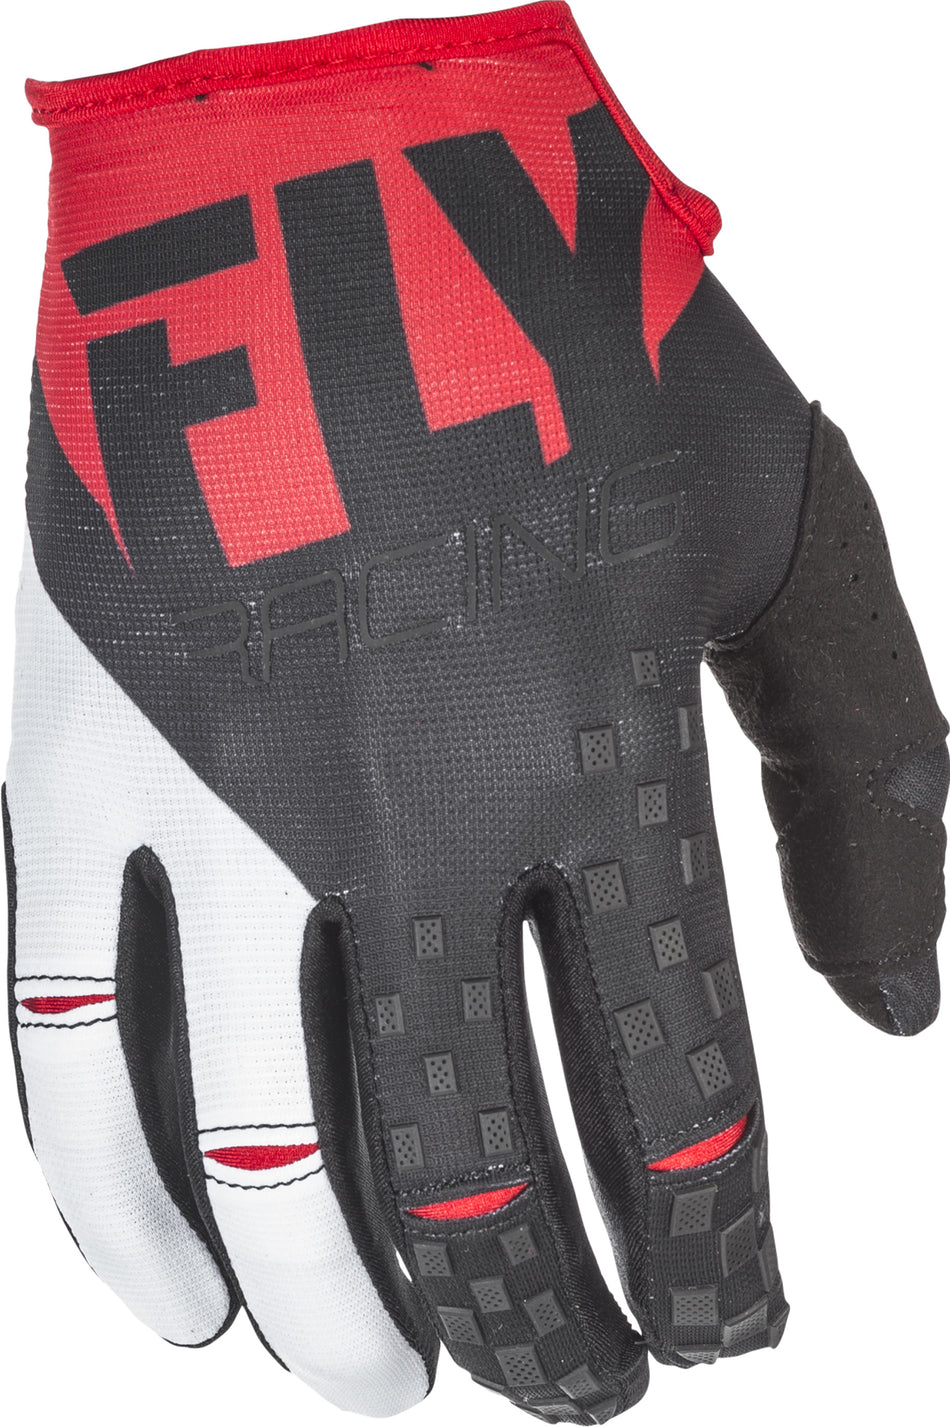 FLY RACING Kinetic Gloves Red/Black Sz 5 371-41205